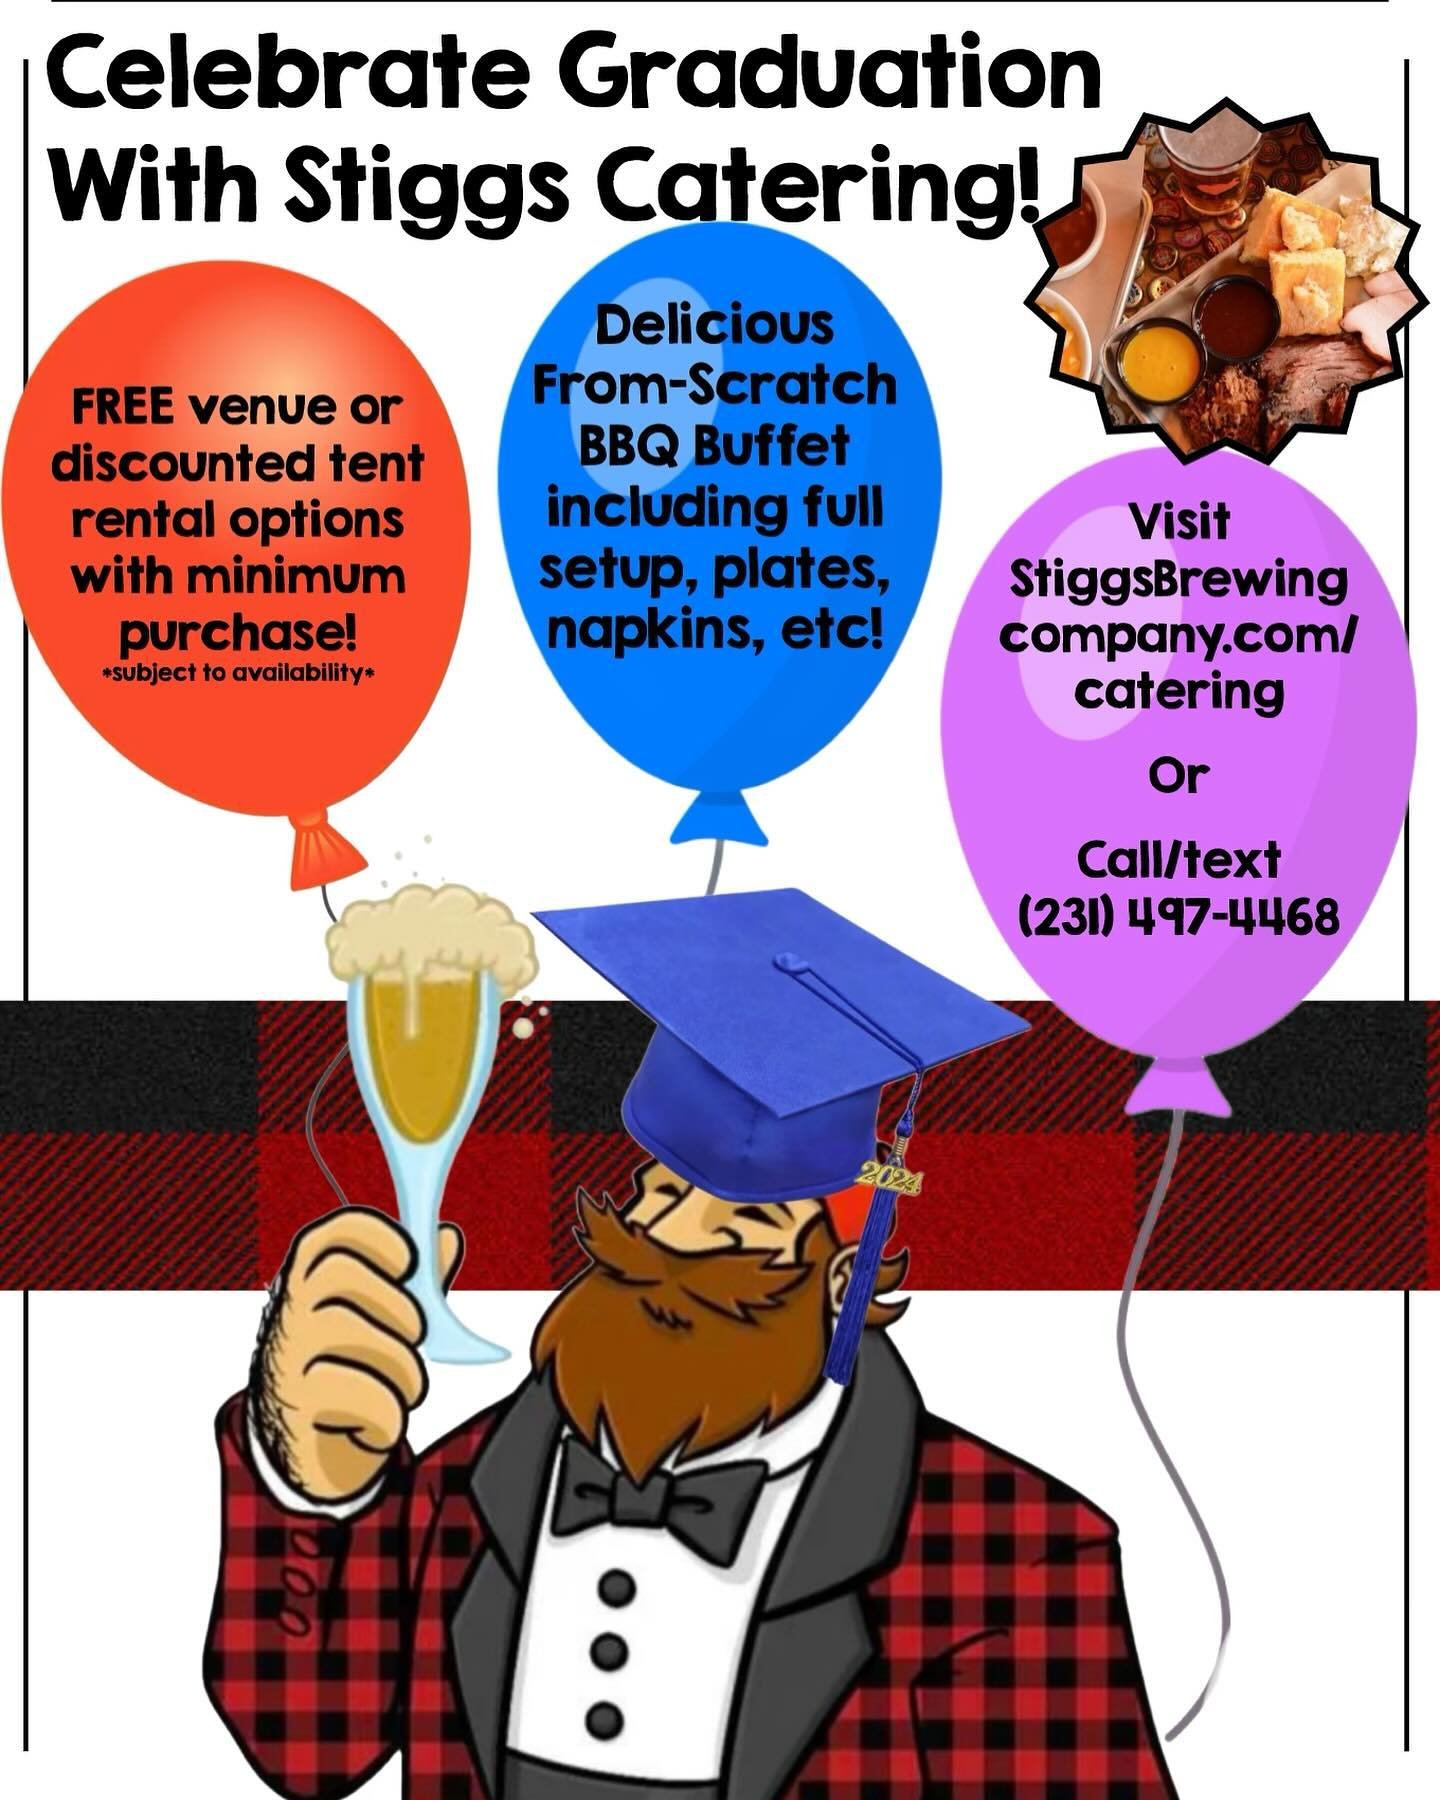 ‼️Graduation Catering Offer‼️ That&rsquo;s right Graduation is around the corner 👩&zwj;🎓 🙌❤️ Free venue OR tent rental with Stiggs catering! 

Full service &amp; casual buffet style catering for that day you&rsquo;ve been working so hard towards! 